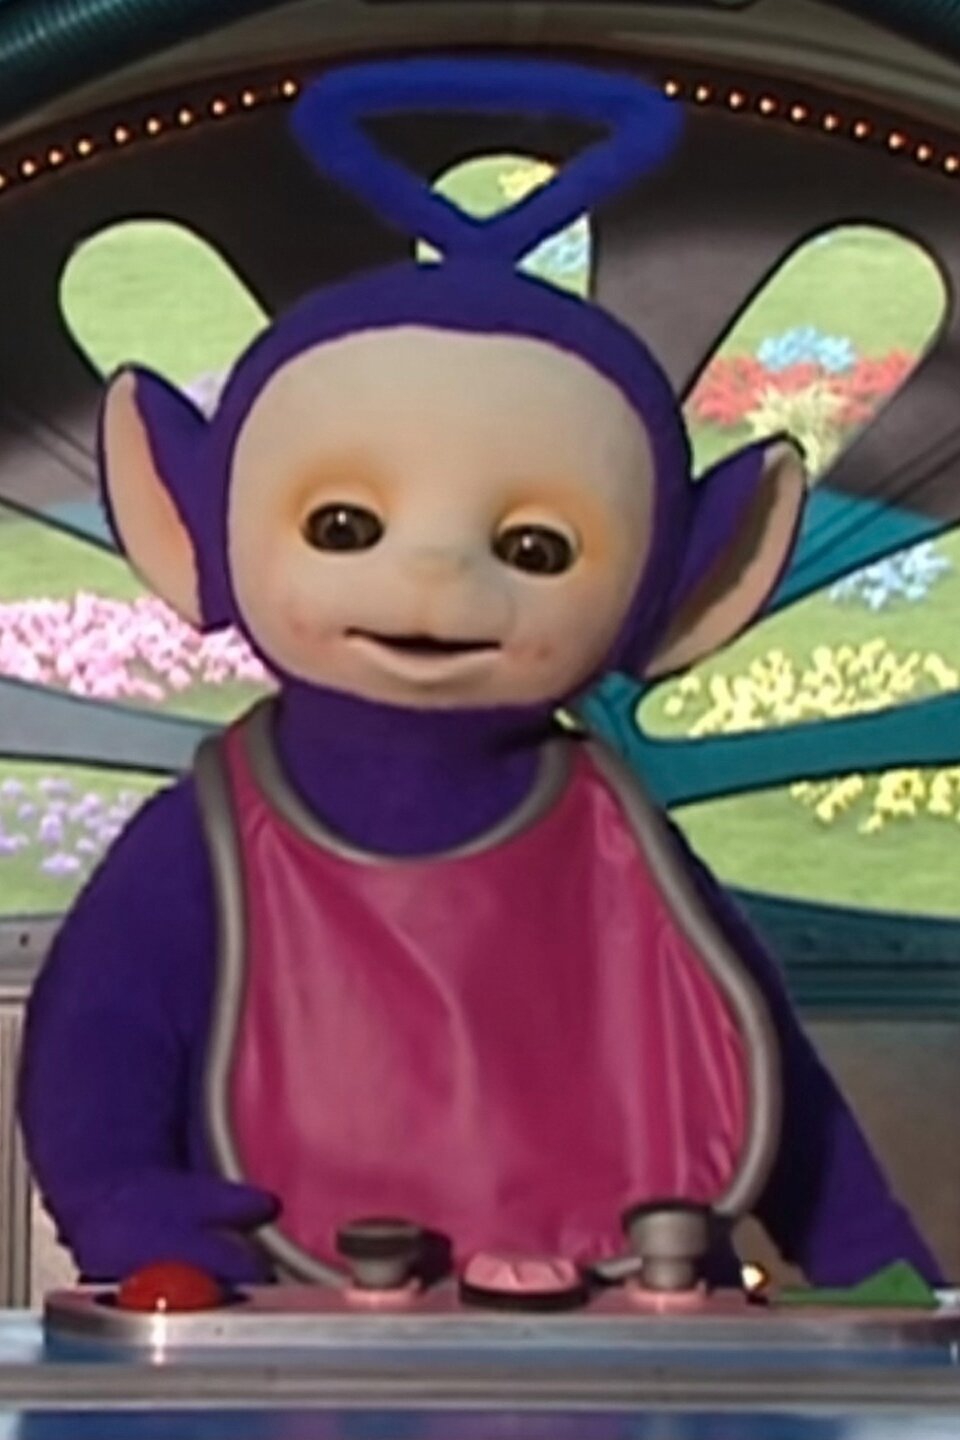 Watch Teletubbies - S2:E58 Colours (Pink) (1998) Online for Free | The ... Po Teletubbies Wallpaper